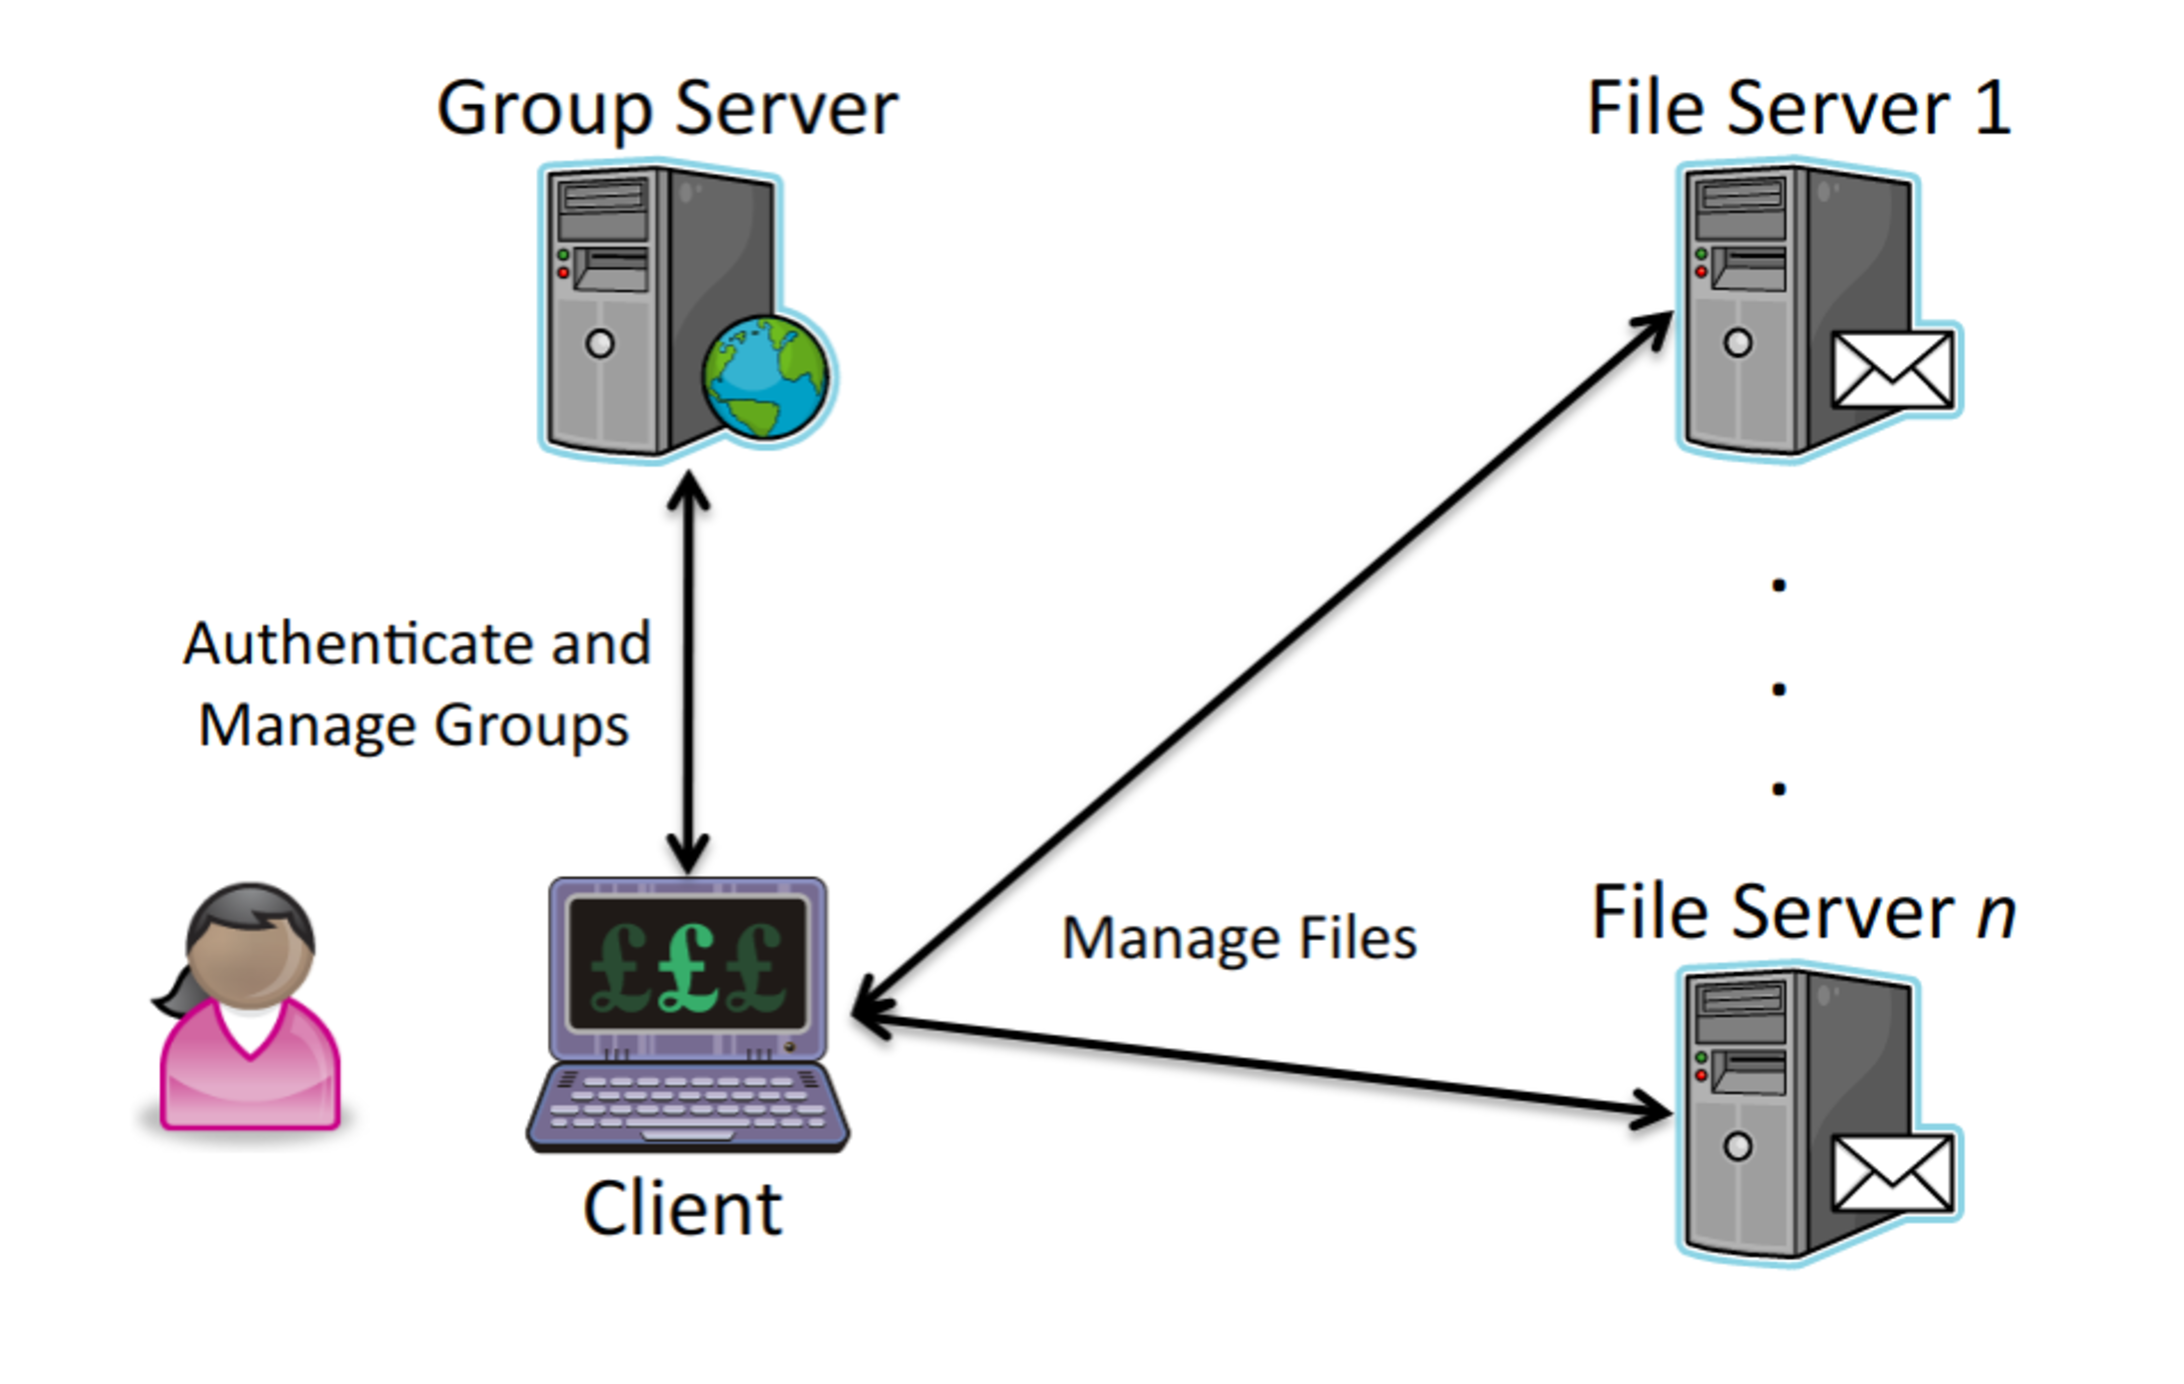 Multiple servers that share files